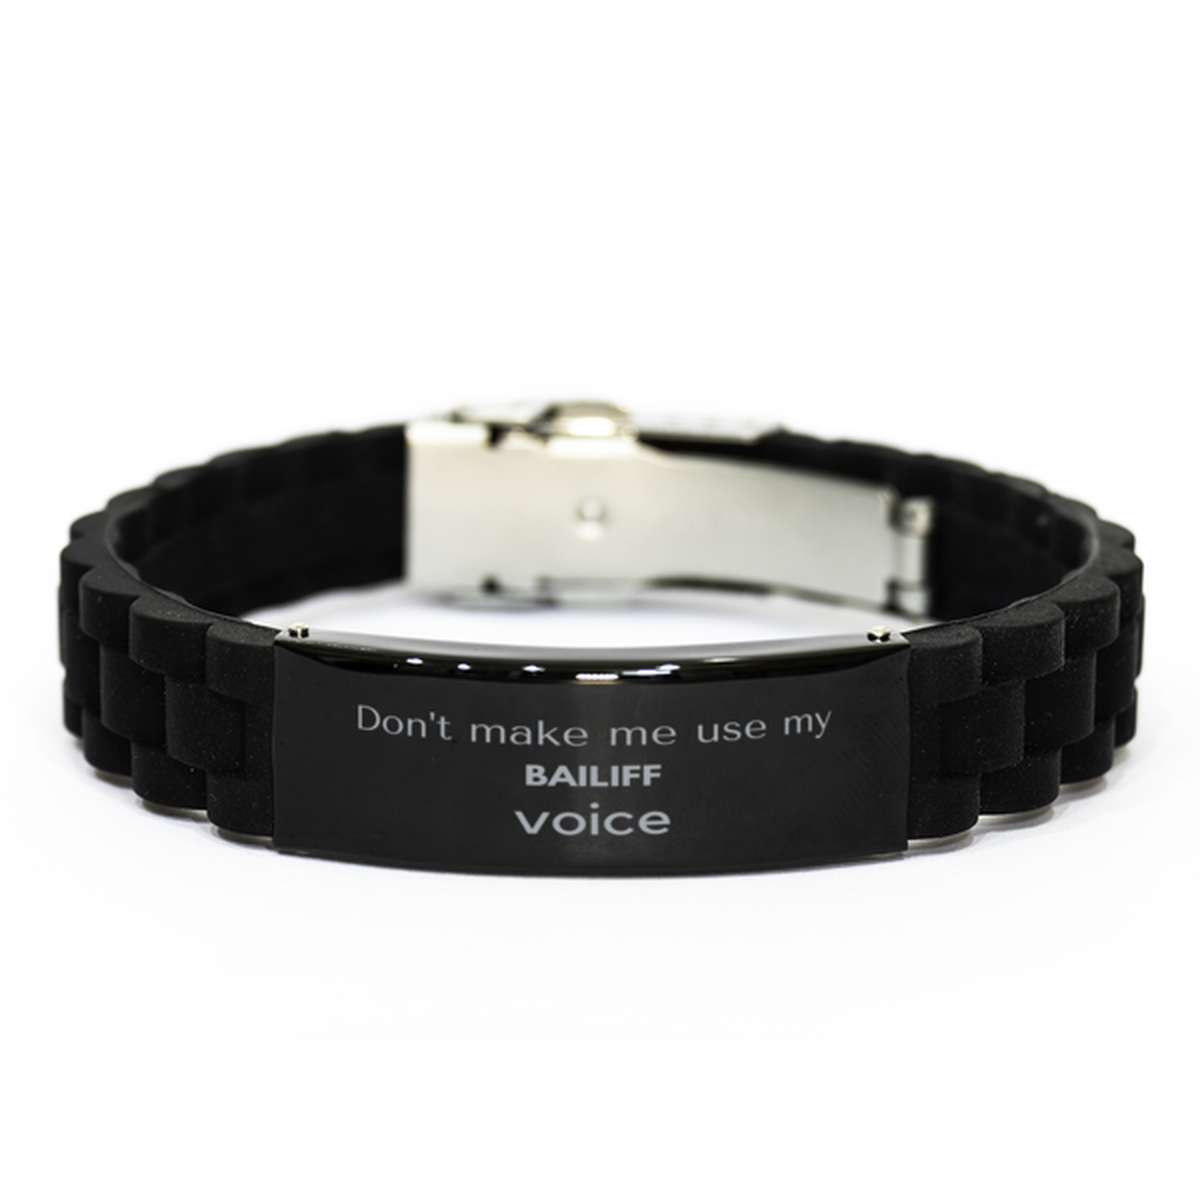 Don't make me use my Bailiff voice, Sarcasm Bailiff Gifts, Christmas Bailiff Black Glidelock Clasp Bracelet Birthday Unique Gifts For Bailiff Coworkers, Men, Women, Colleague, Friends